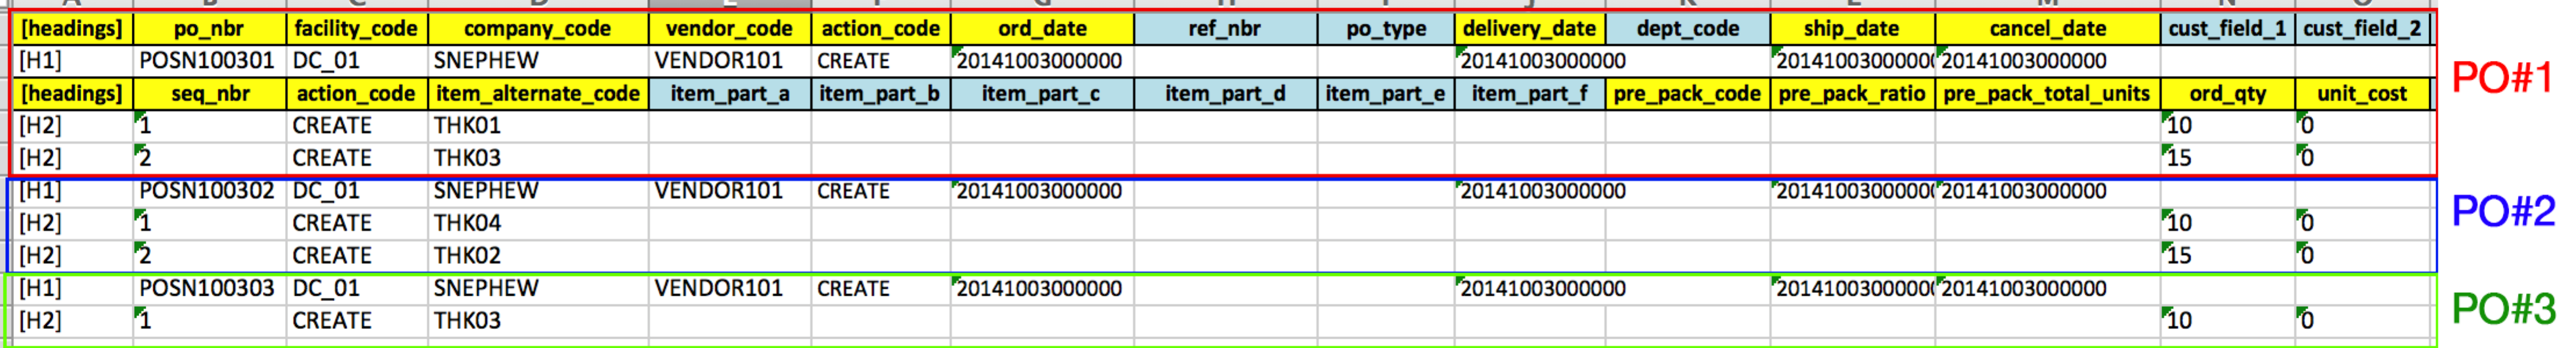 Creating Multiple POs in the Same POS File